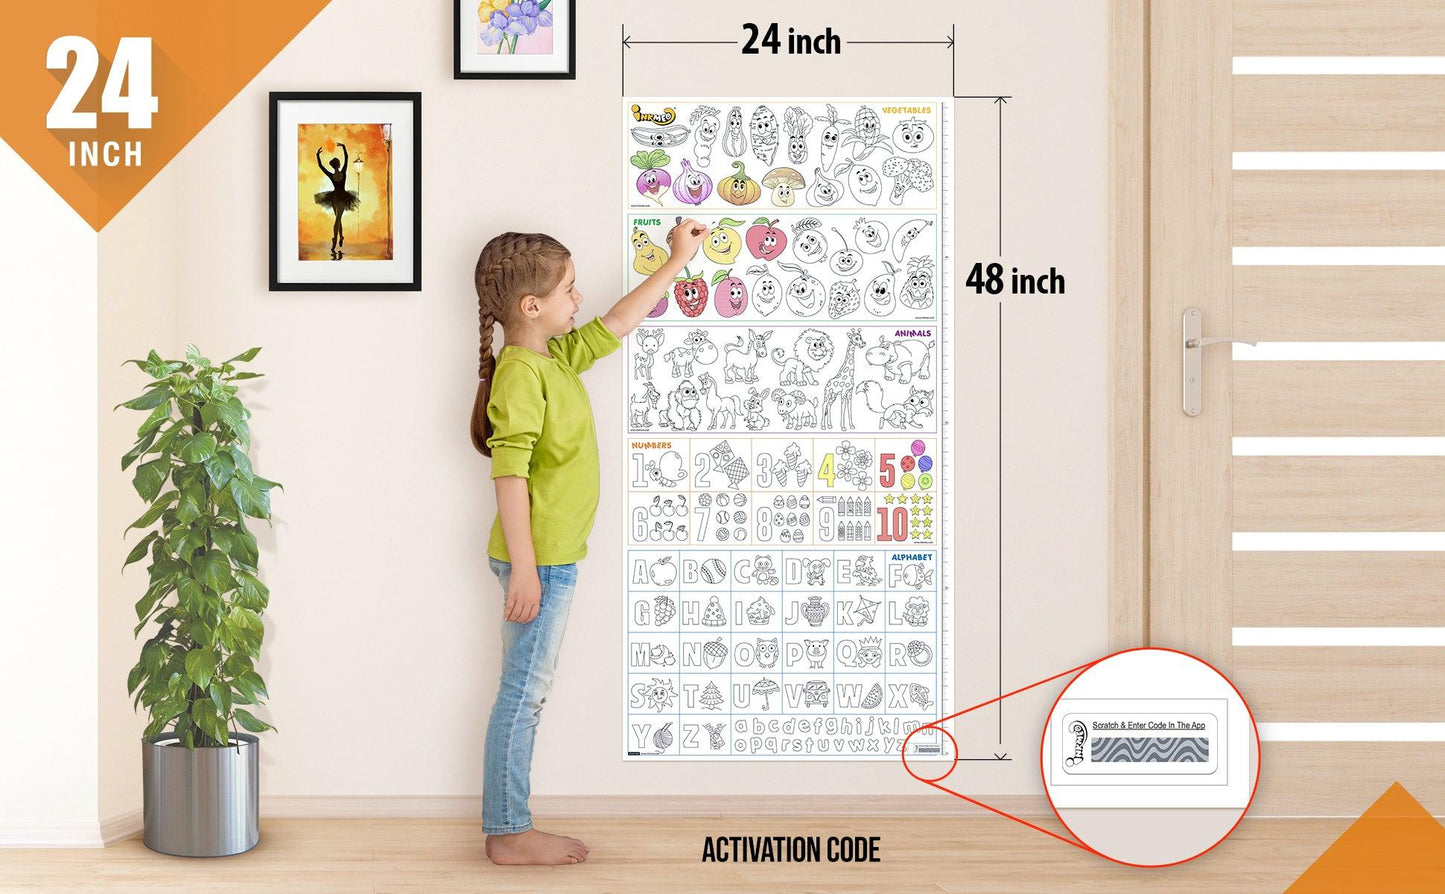 The image shows a home backdrop with a child learning and colouring in a sheet sticked to the wall vertically with the activation code zoomed in from the downside right corner